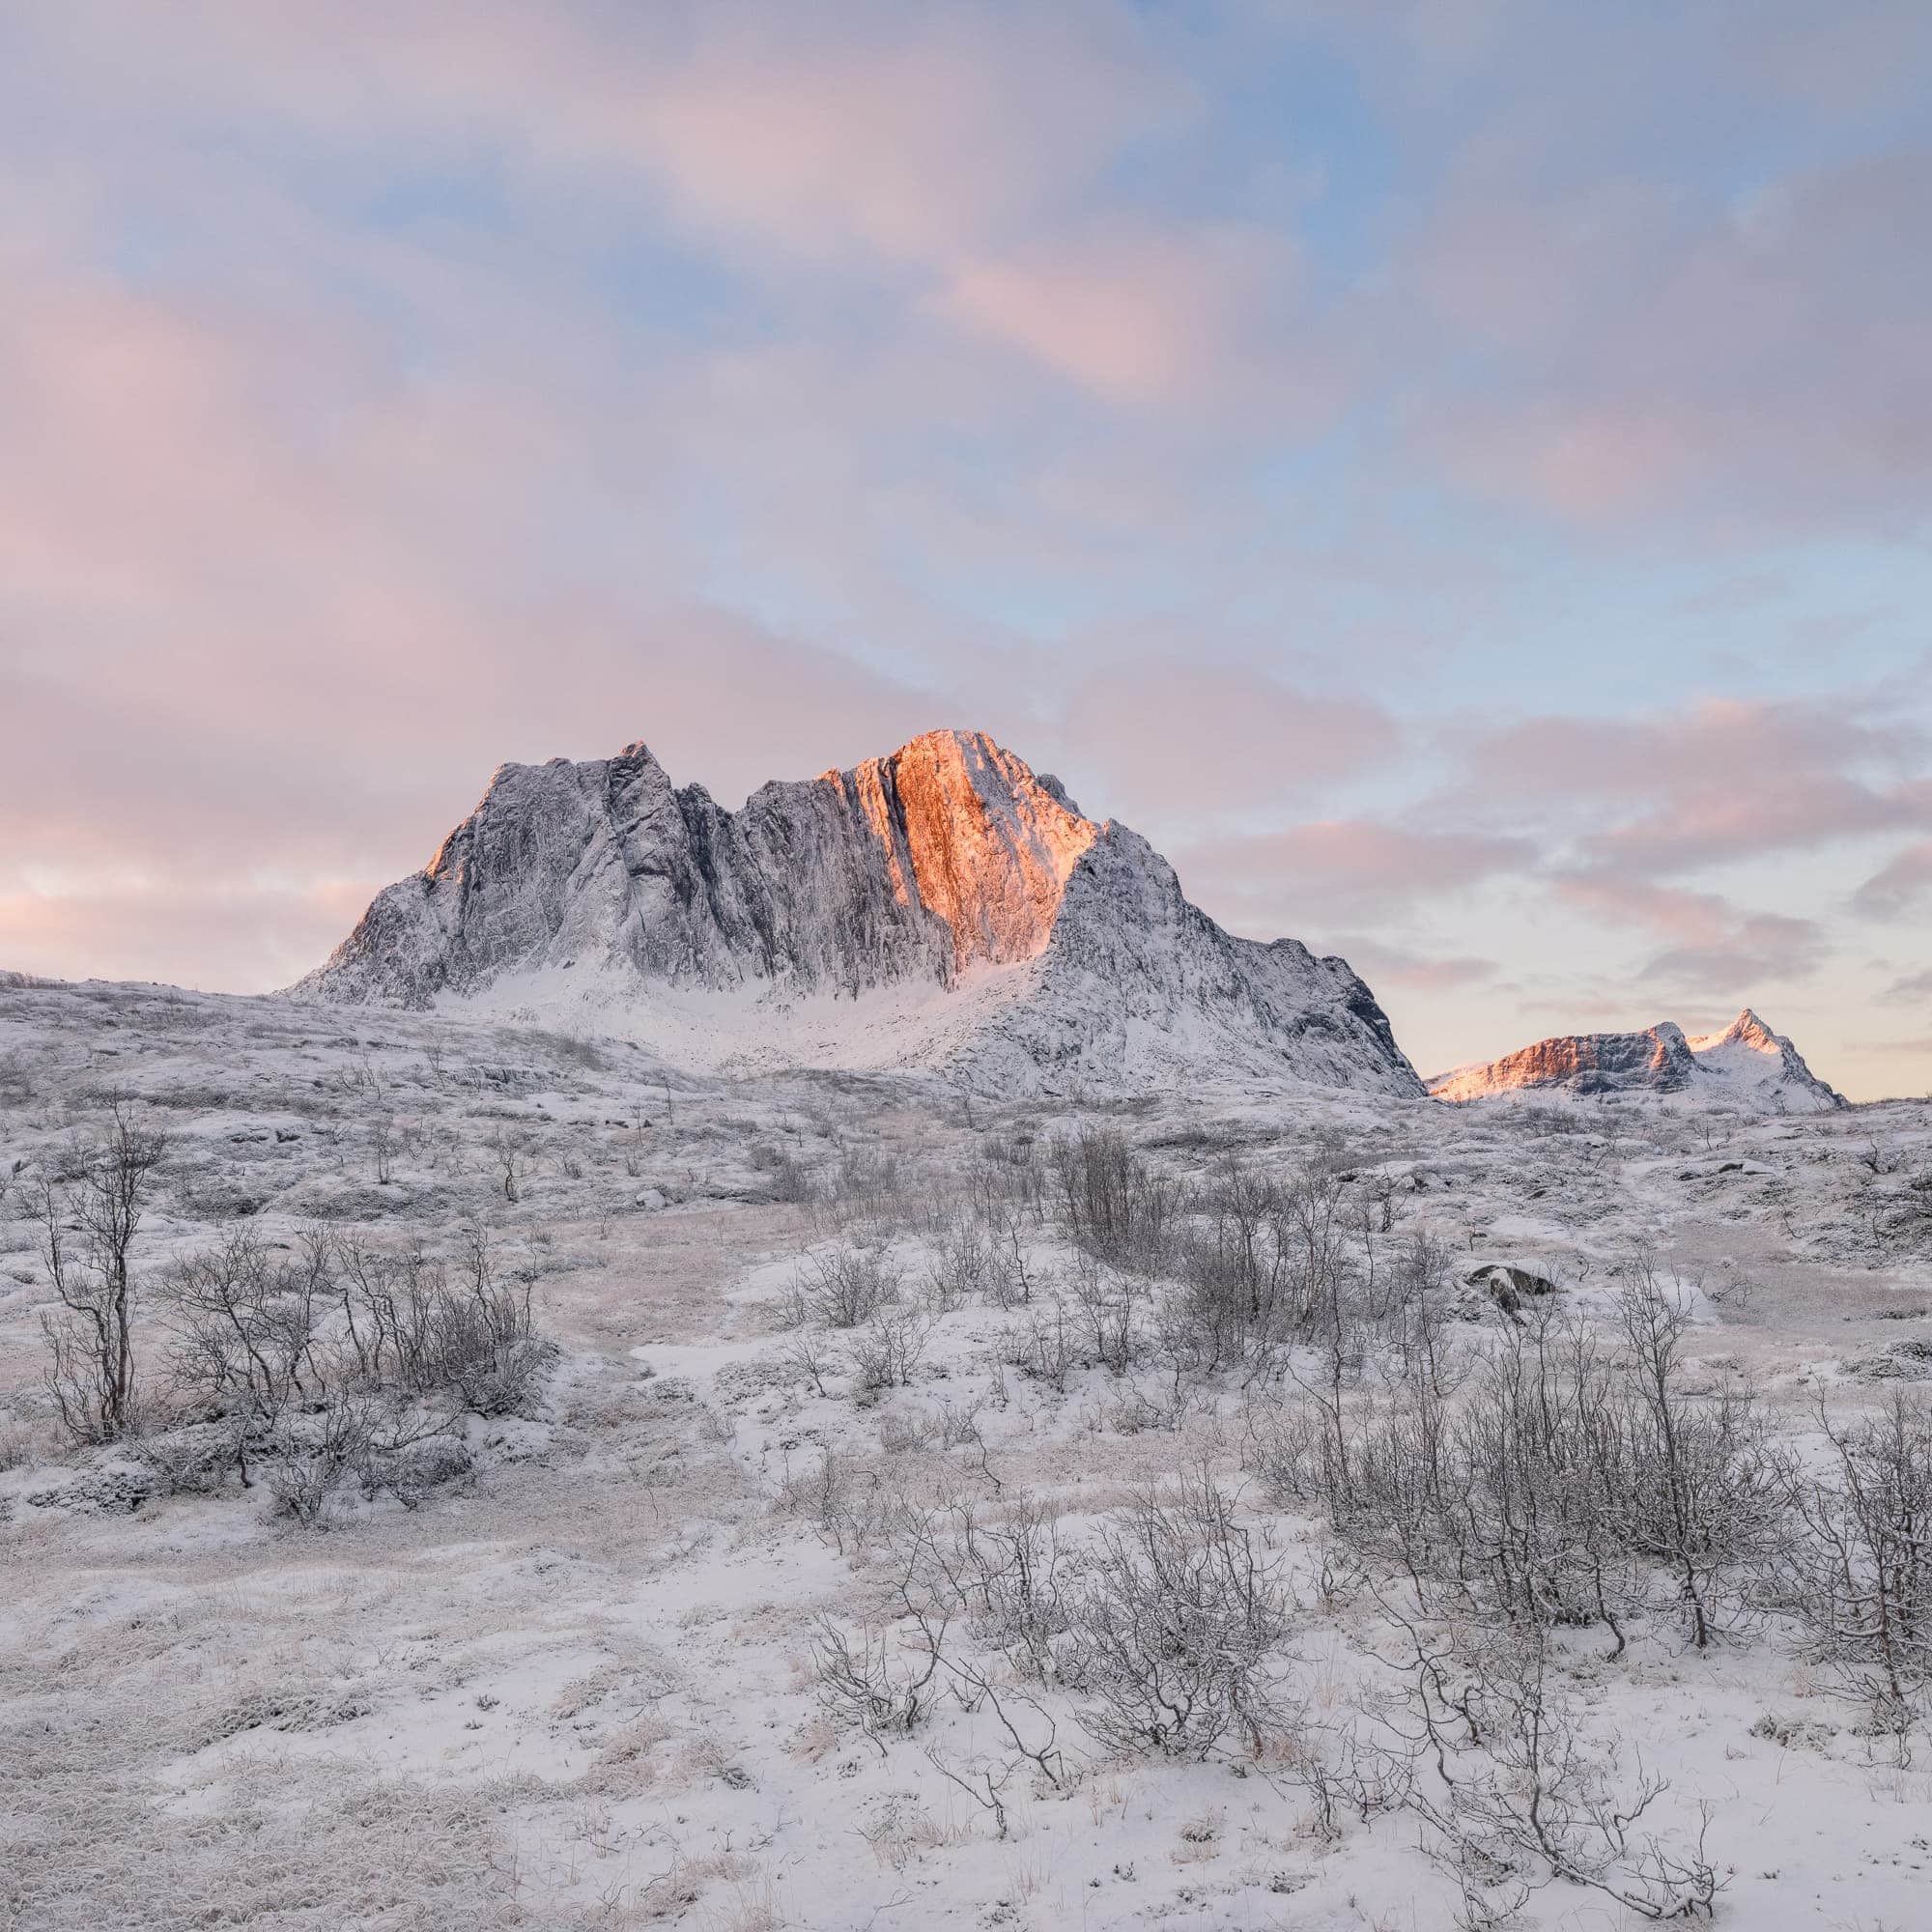 First light of dawn illuminating the snowy peaks at the entry of Barden trail in Lofoten with a soft pink sky.